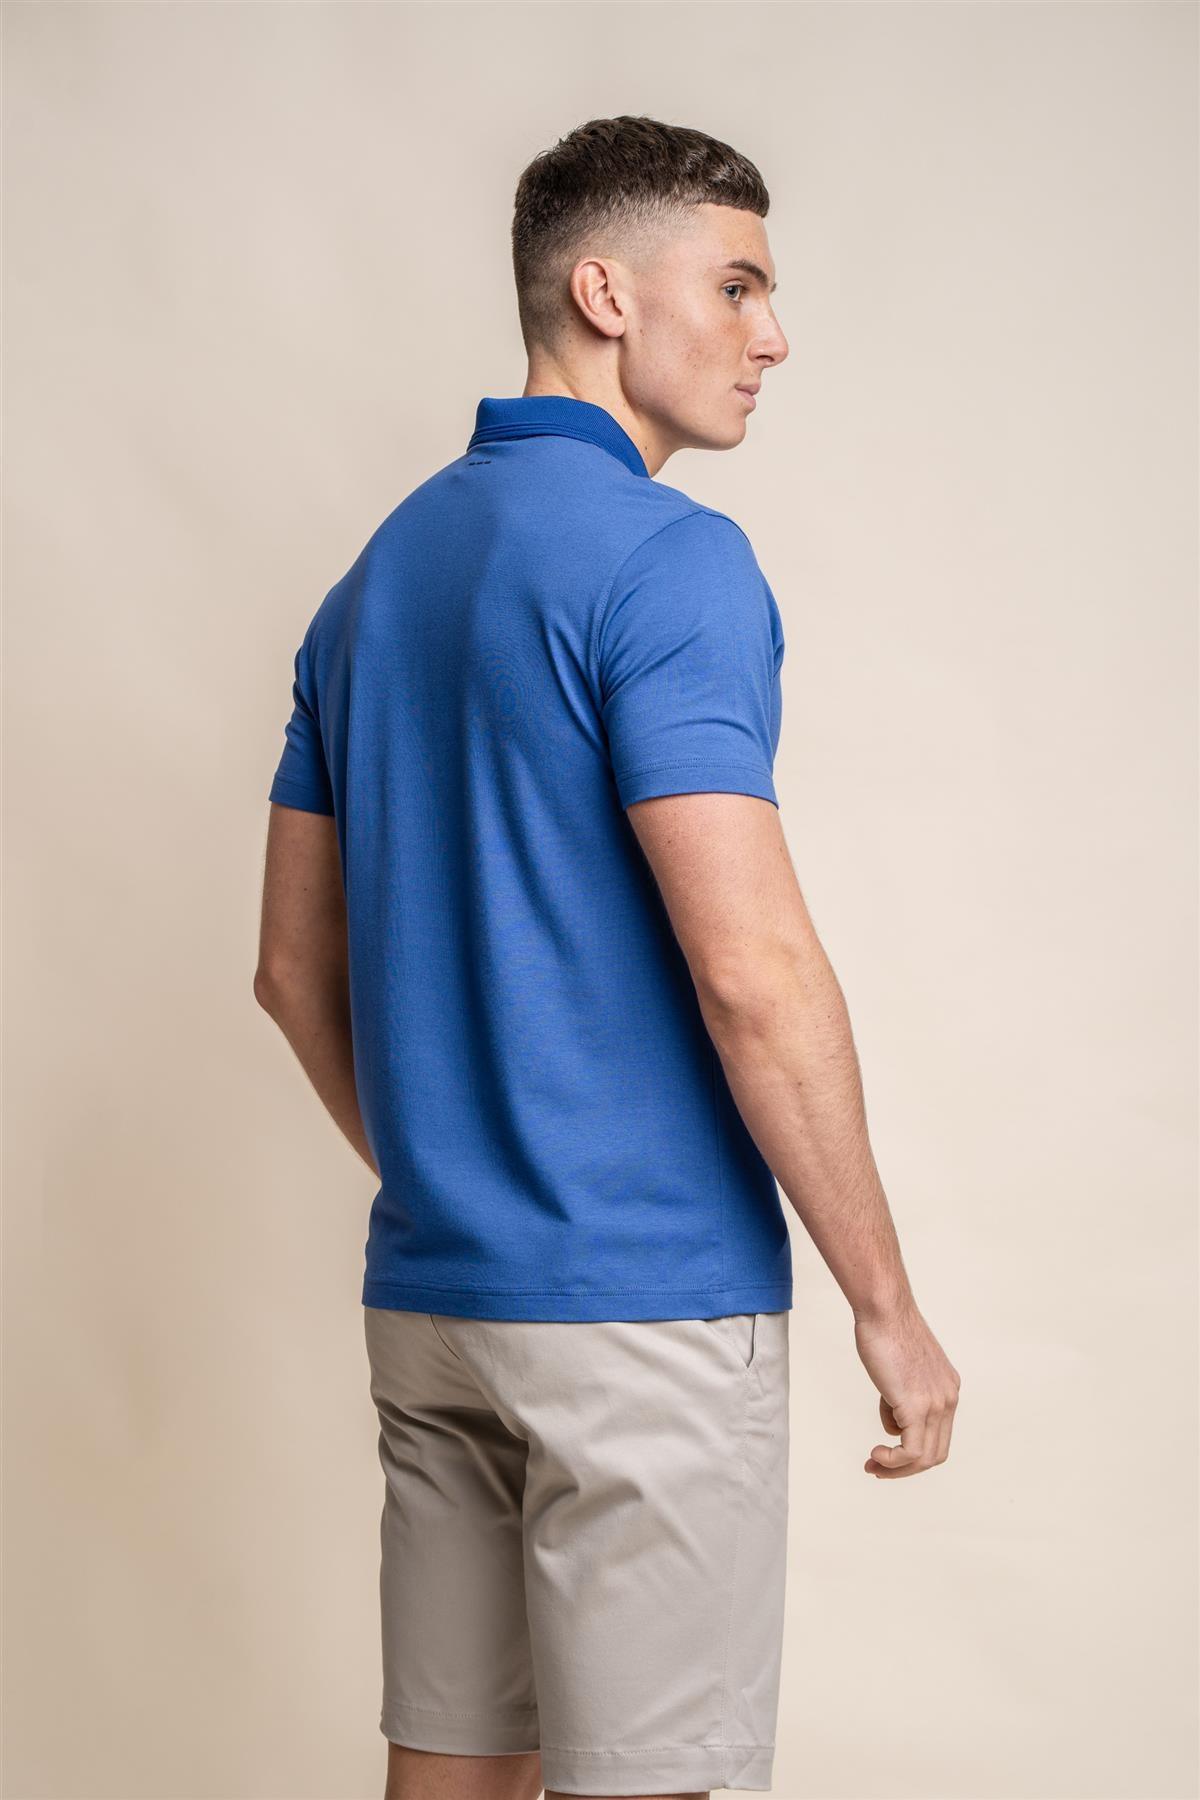 Kelsey electric blue polo T-shirt back